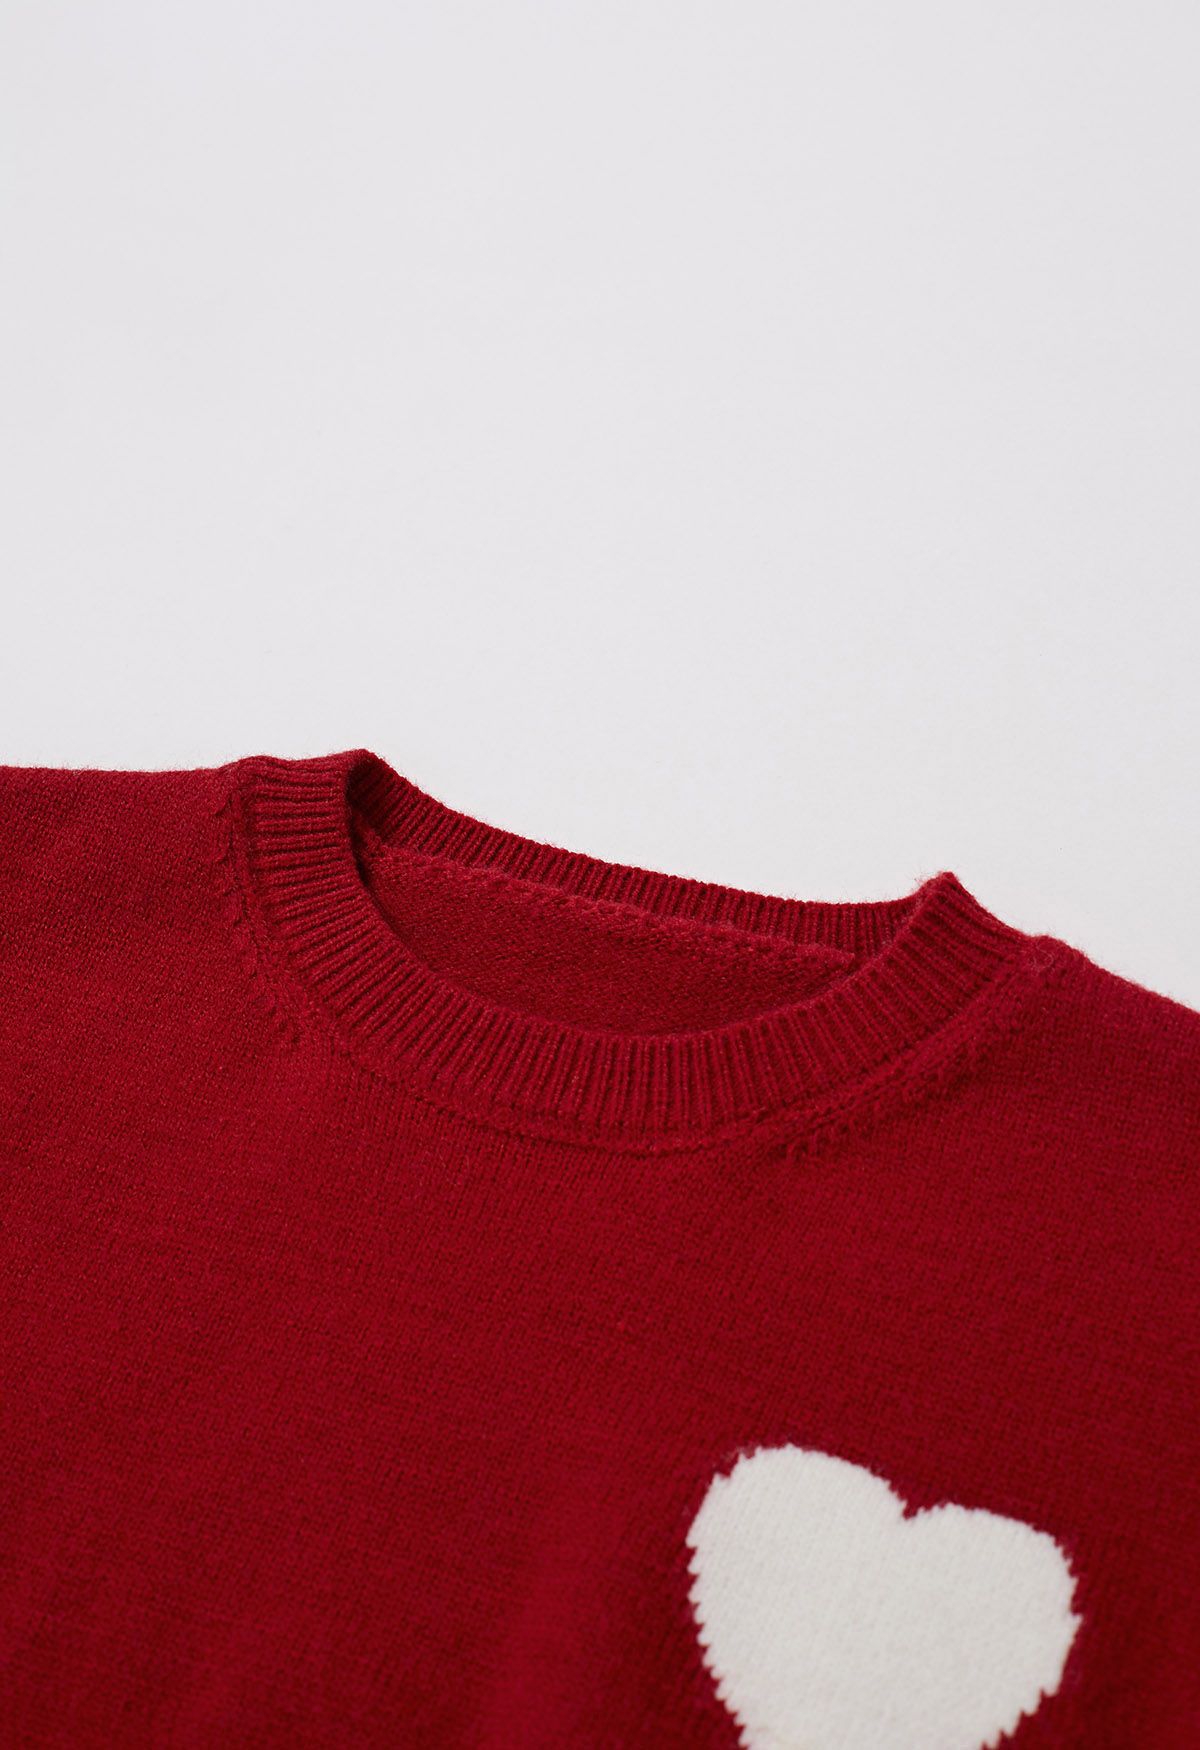 Sweet Heart Cozy Knit Sweater in Red - Retro, Indie and Unique Fashion